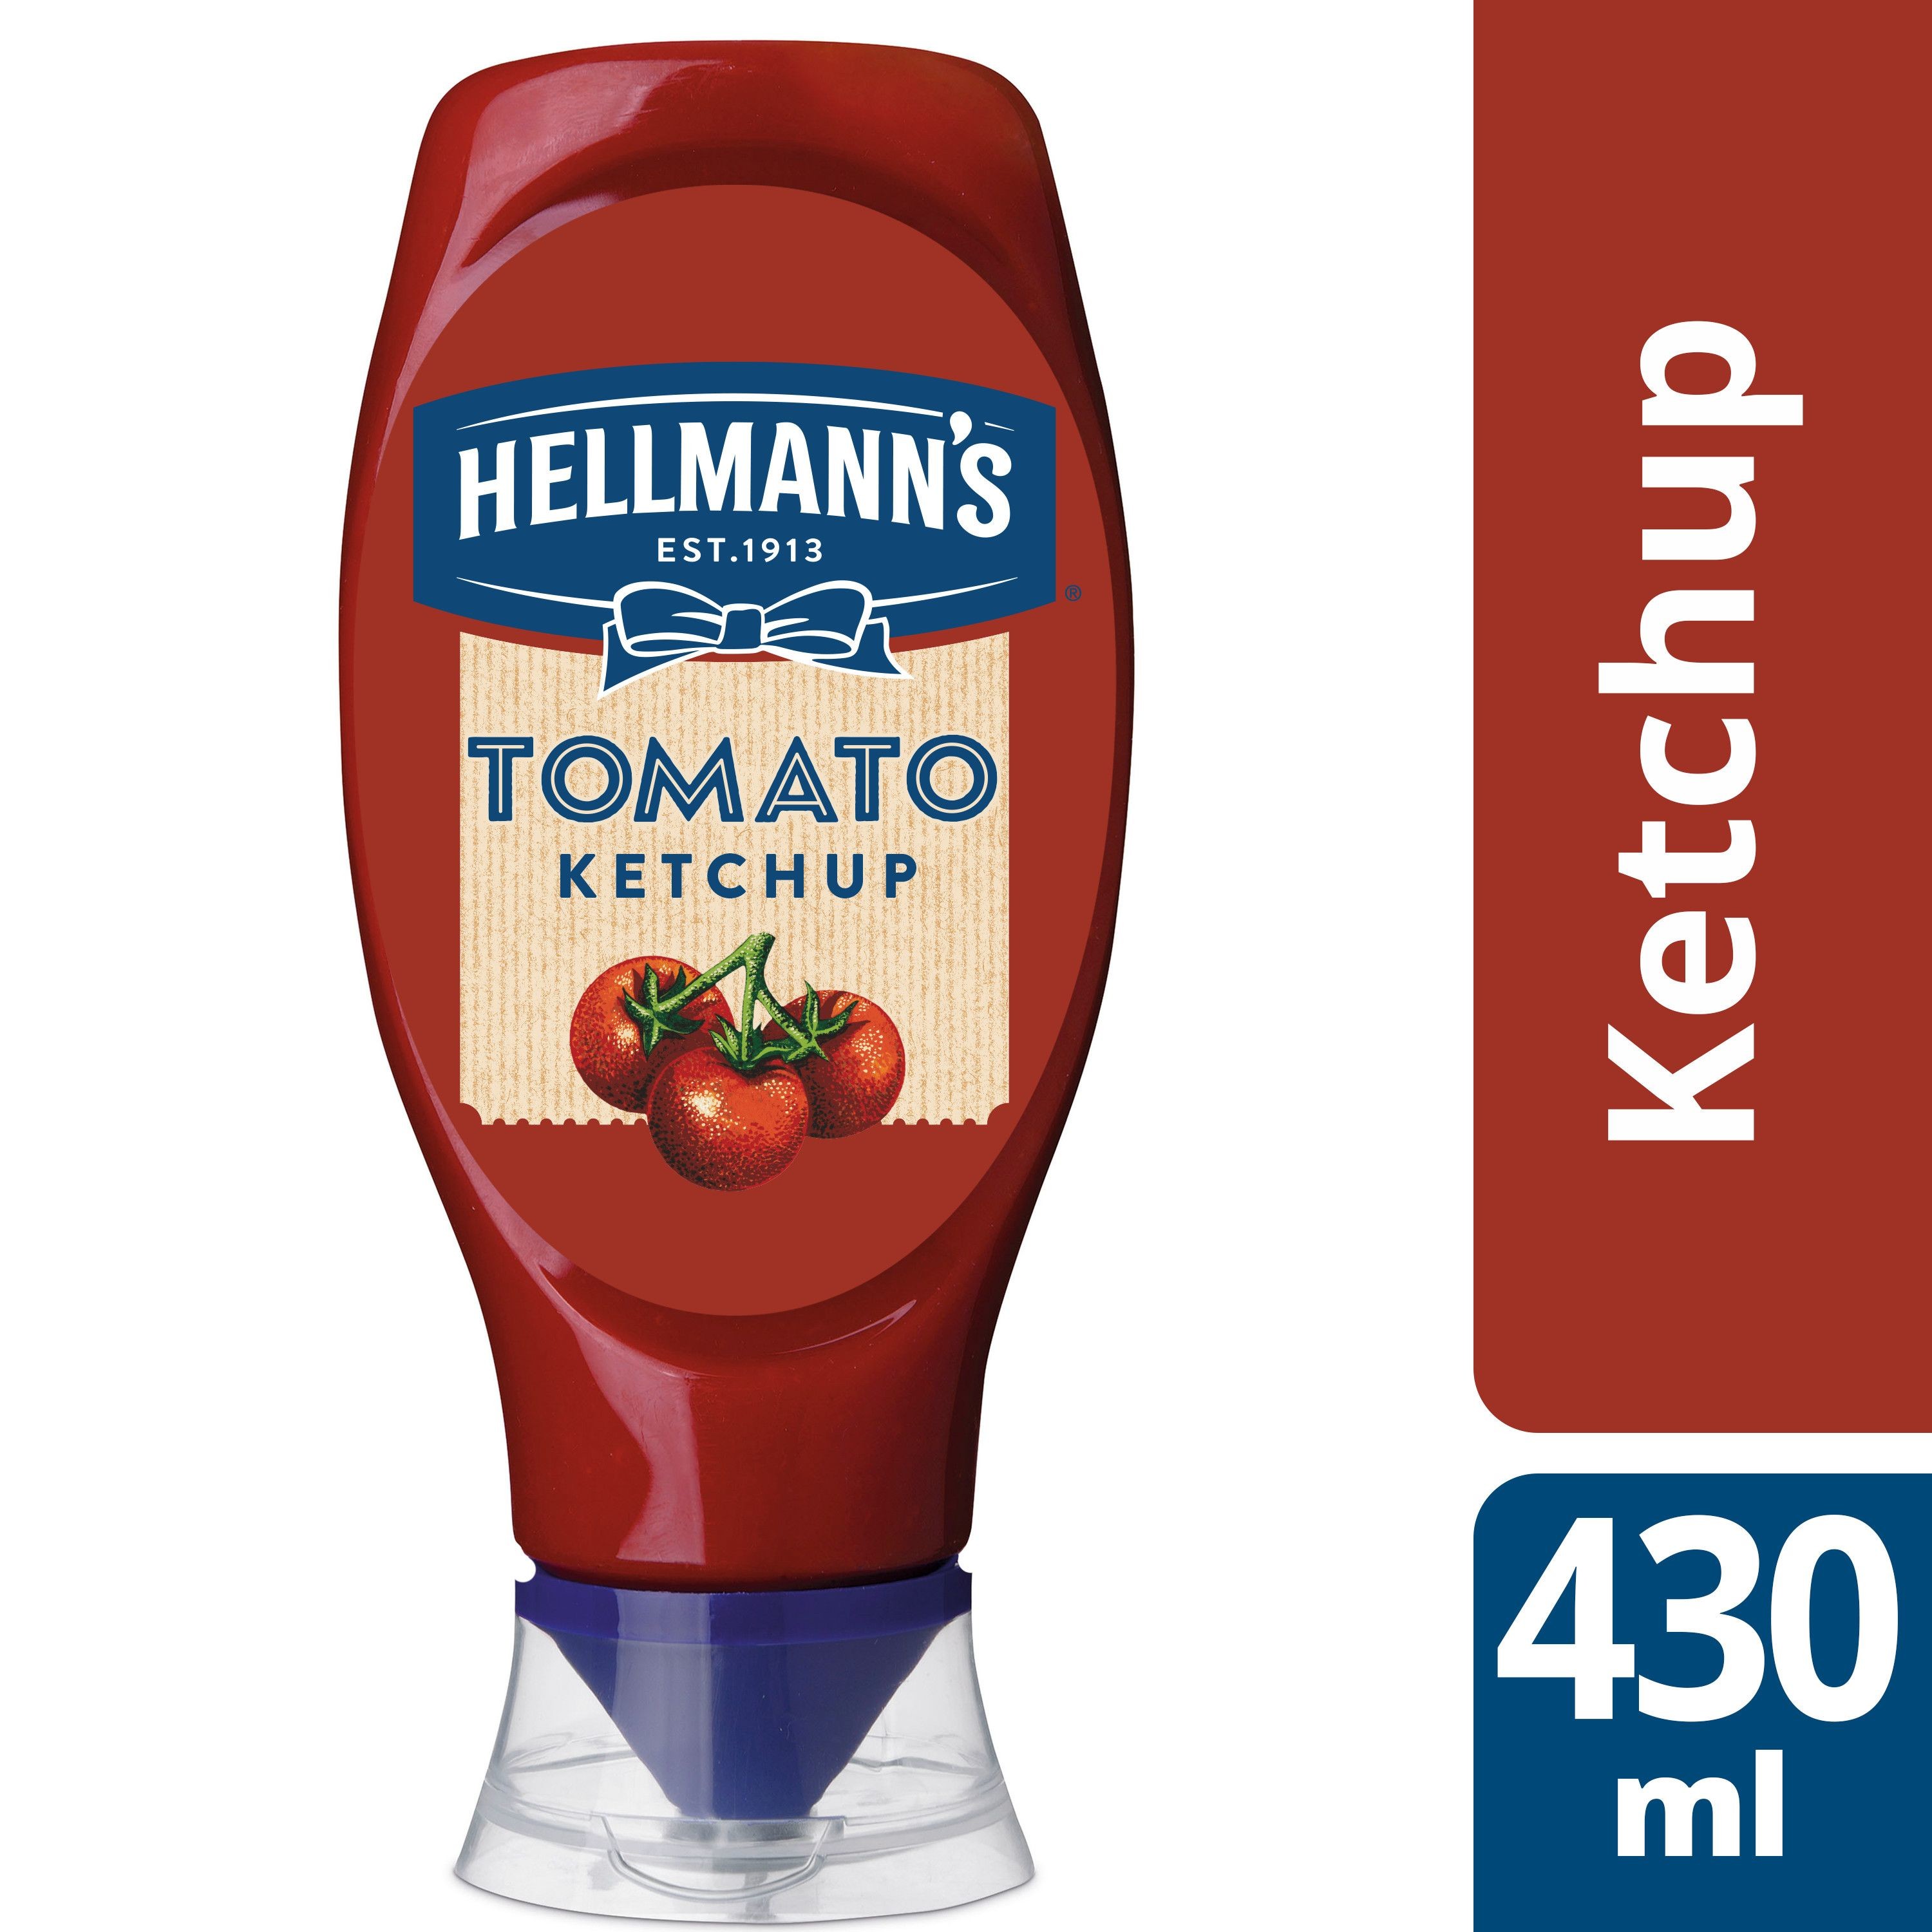 Hellmann's tomato ketchup 430ml bouteille pincable